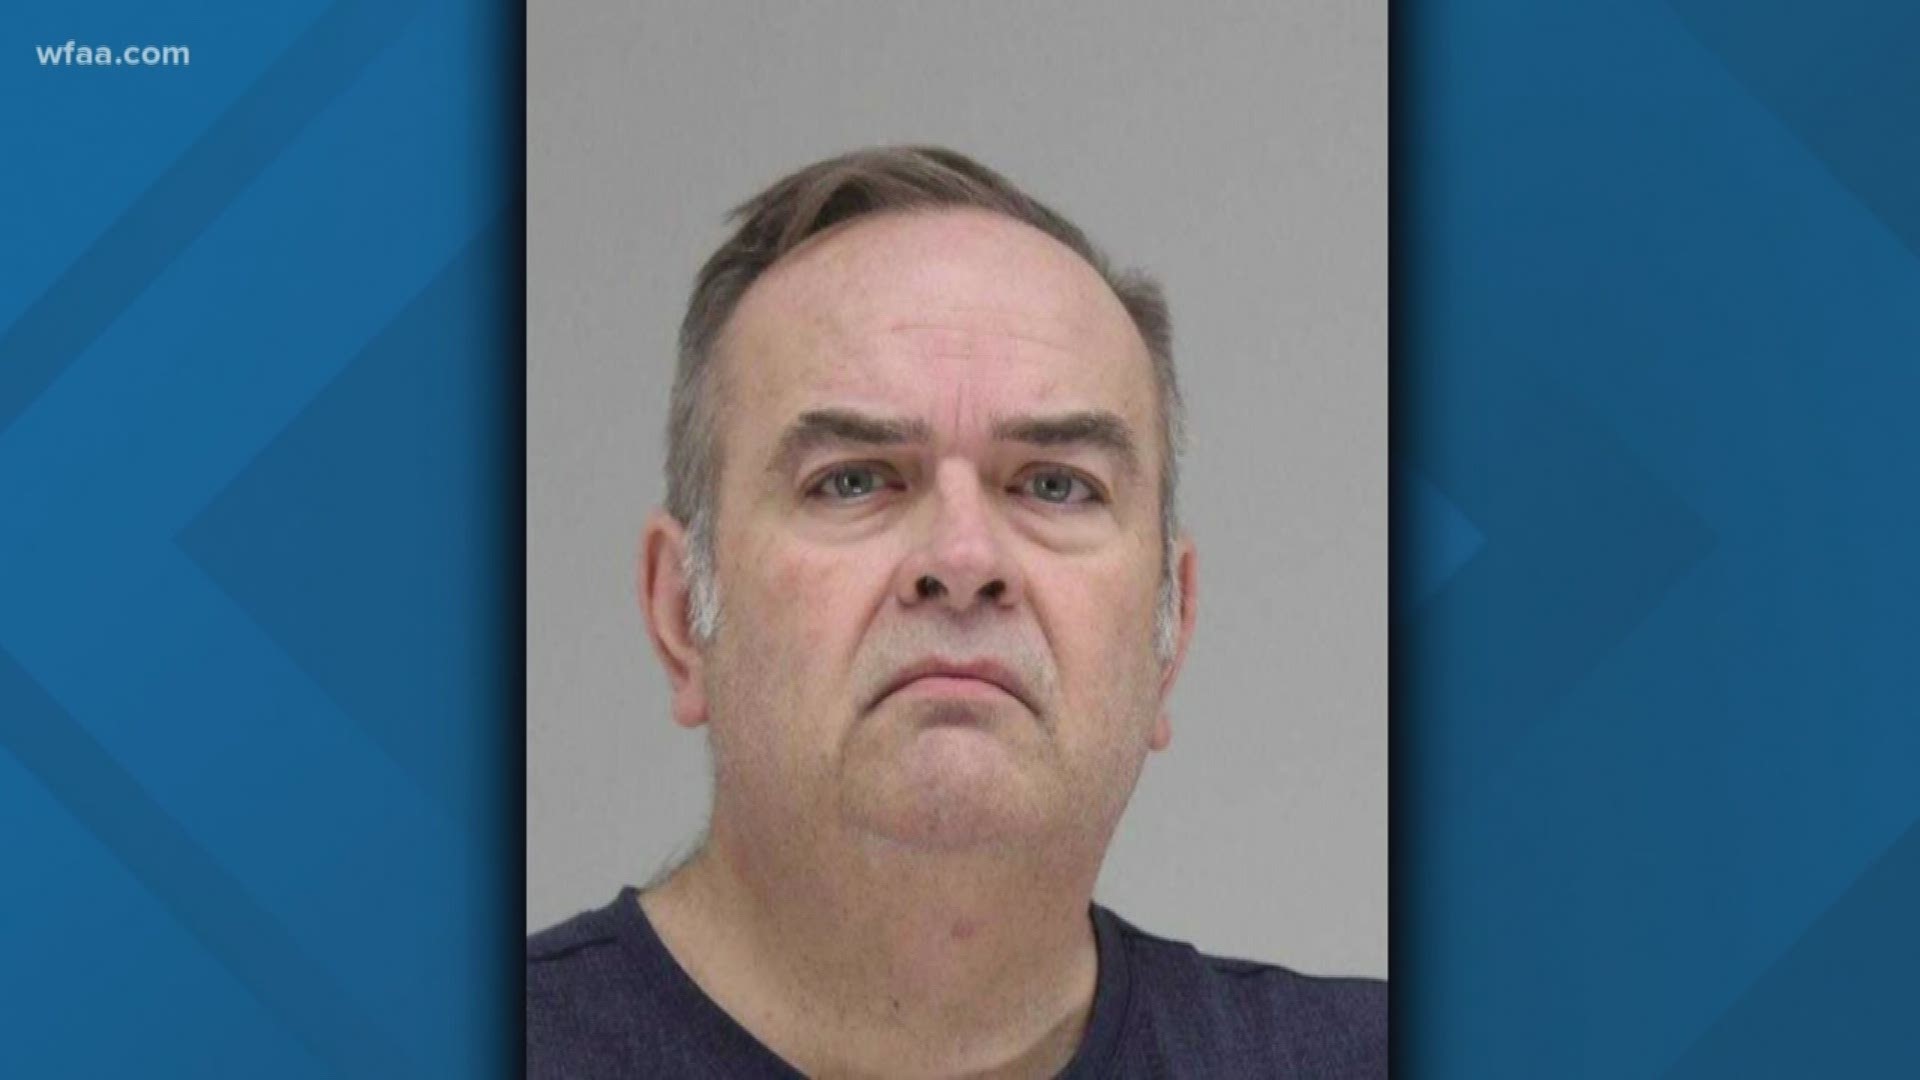 He's accused of trying to solicit a minor for sex, police said.